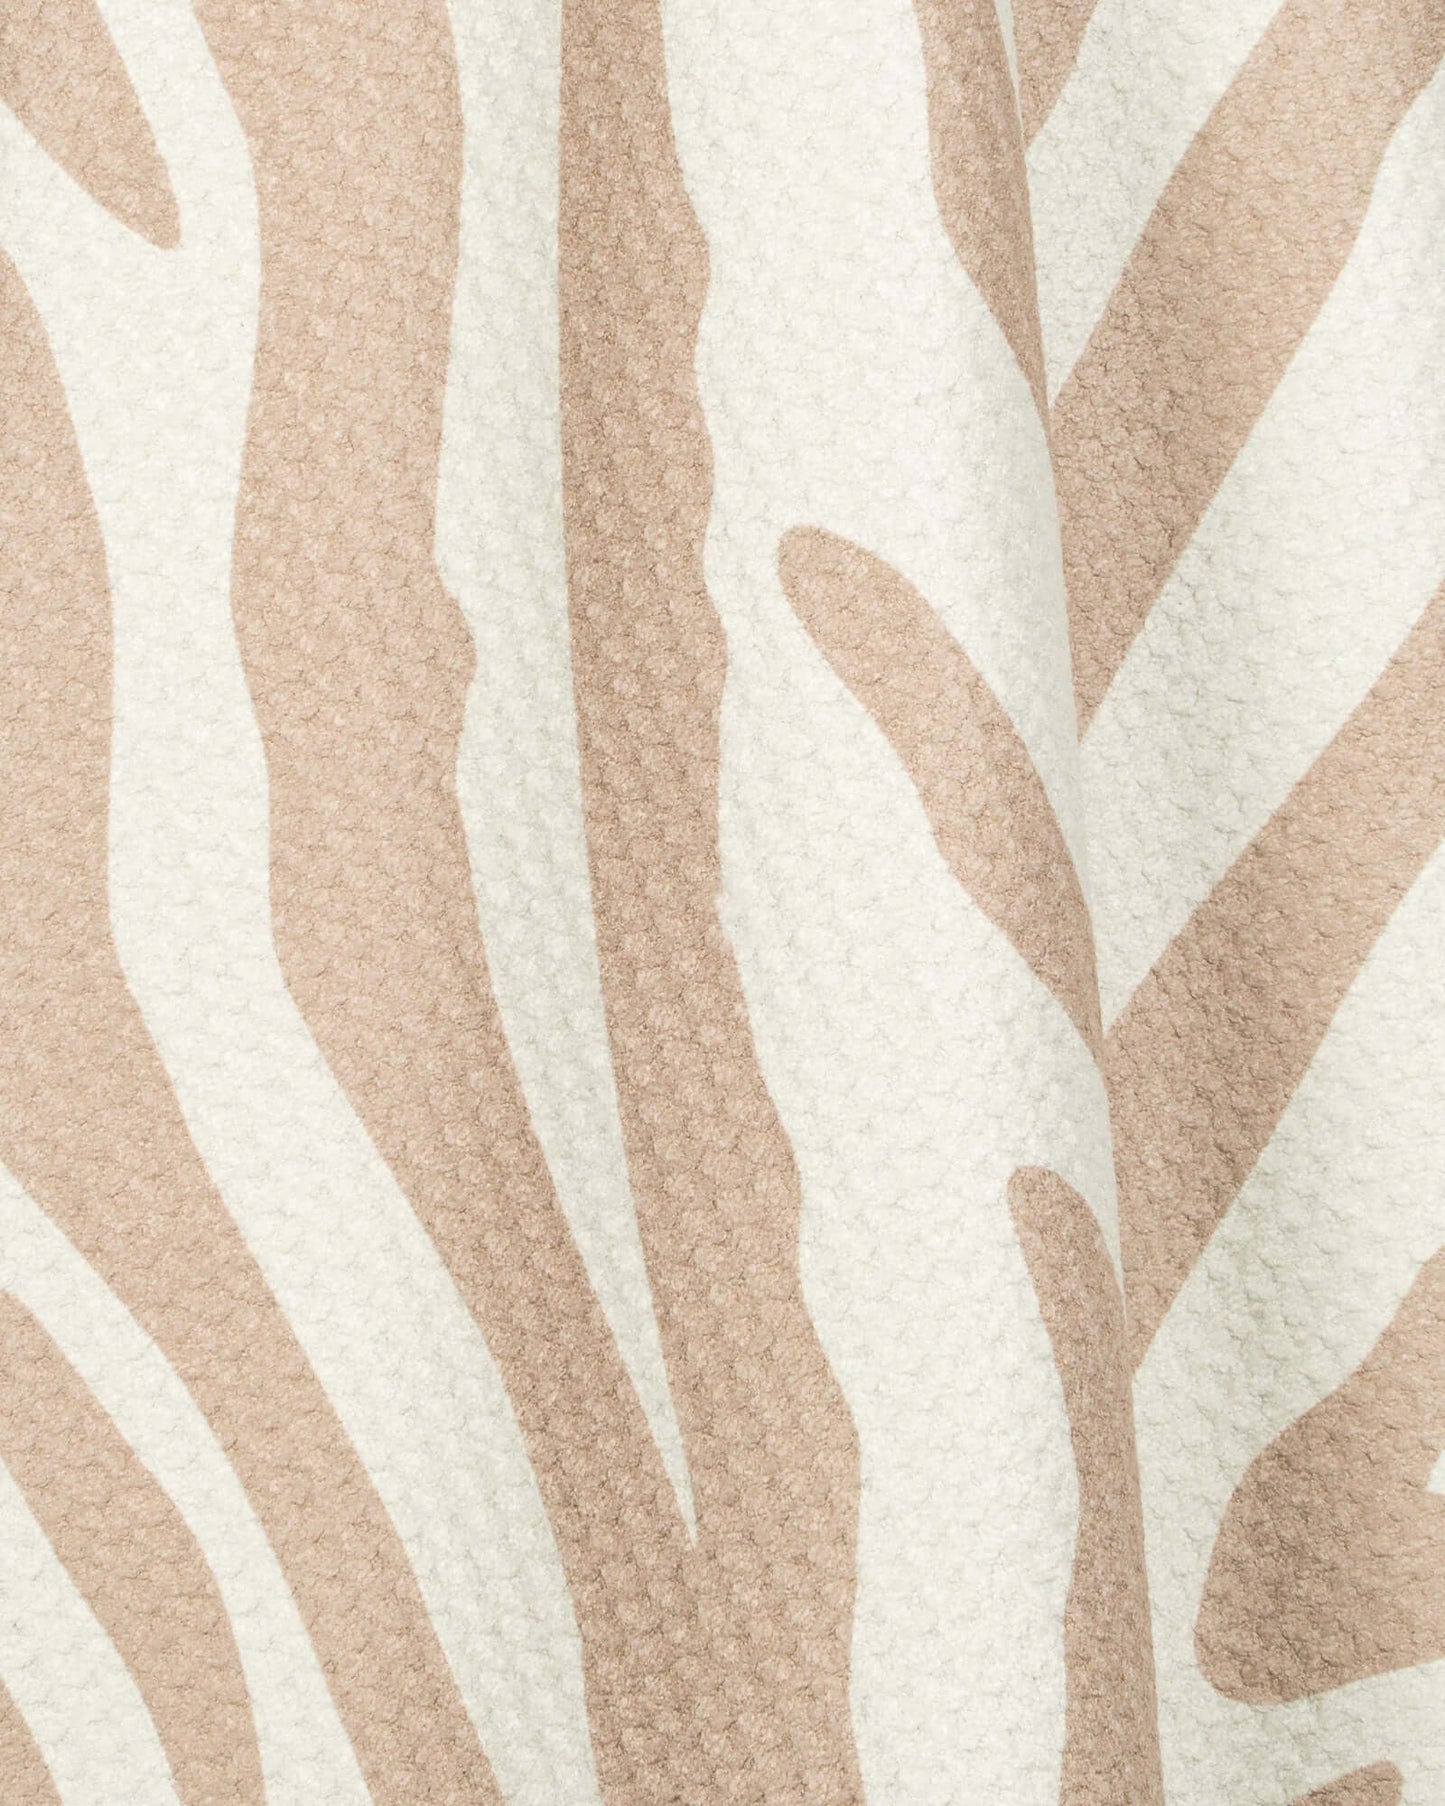 Double Zebra Beige - Towel for Two - Sand Society Sand Free Sustainable Beach Towel